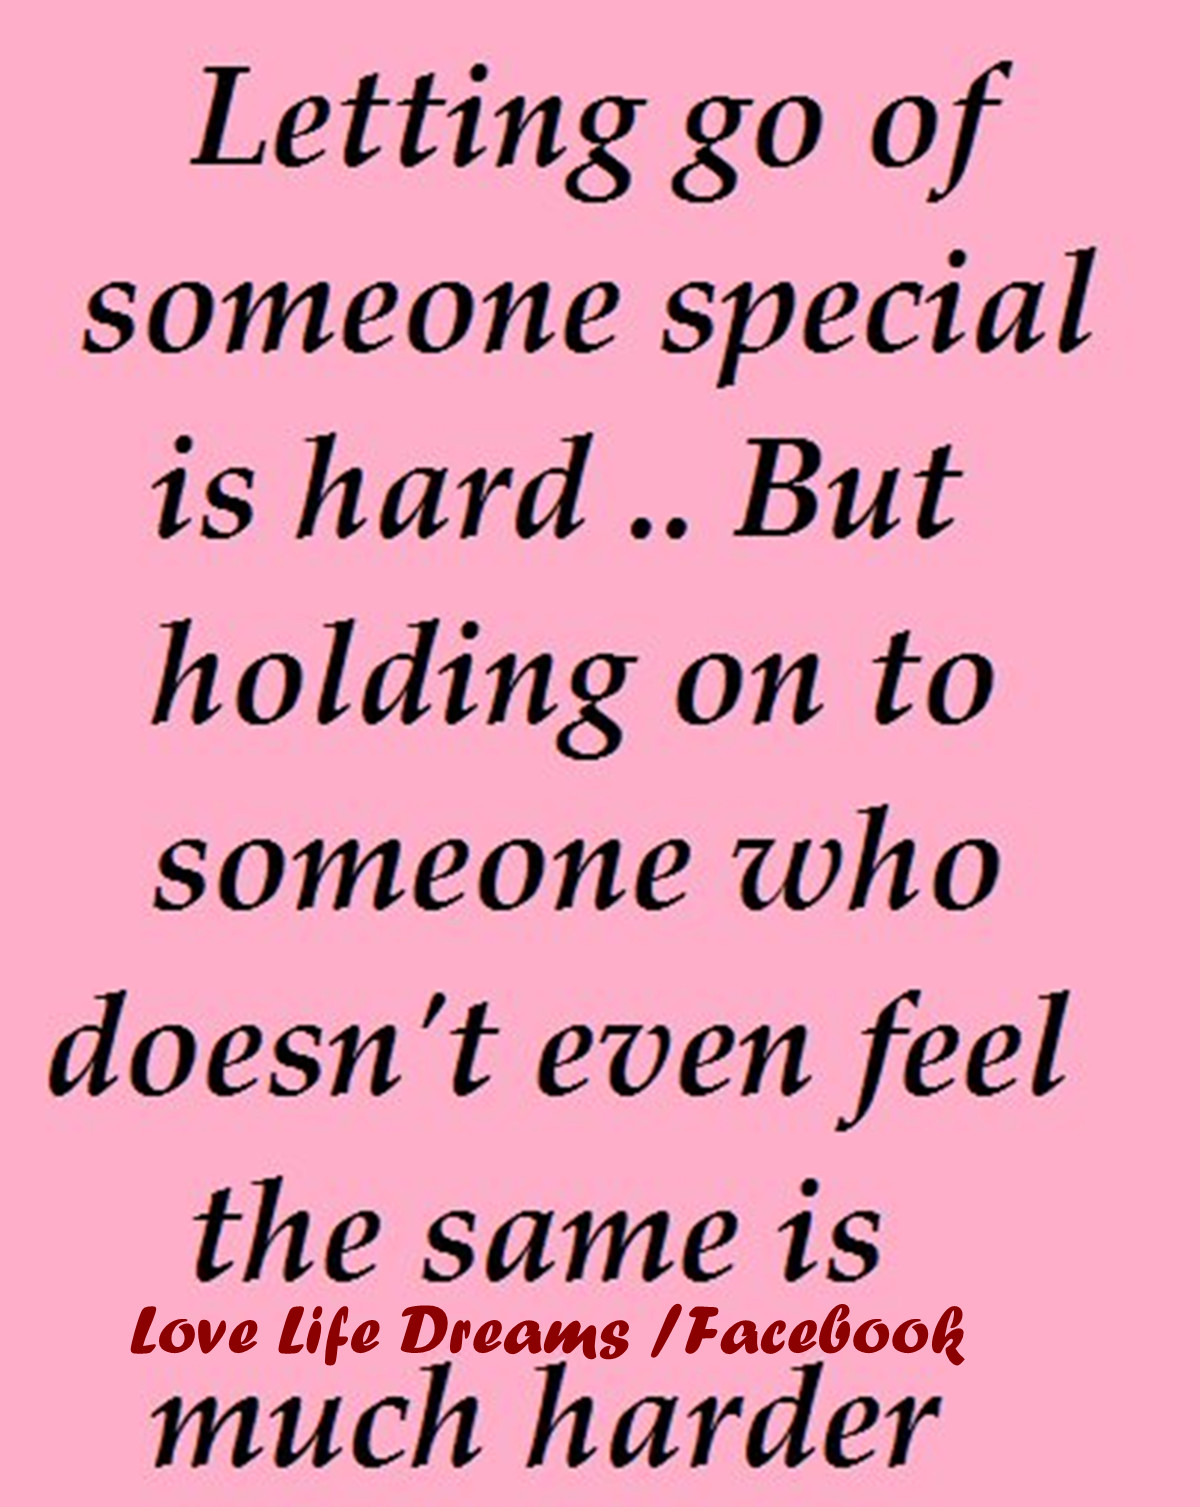 Letting go of someone special is hard